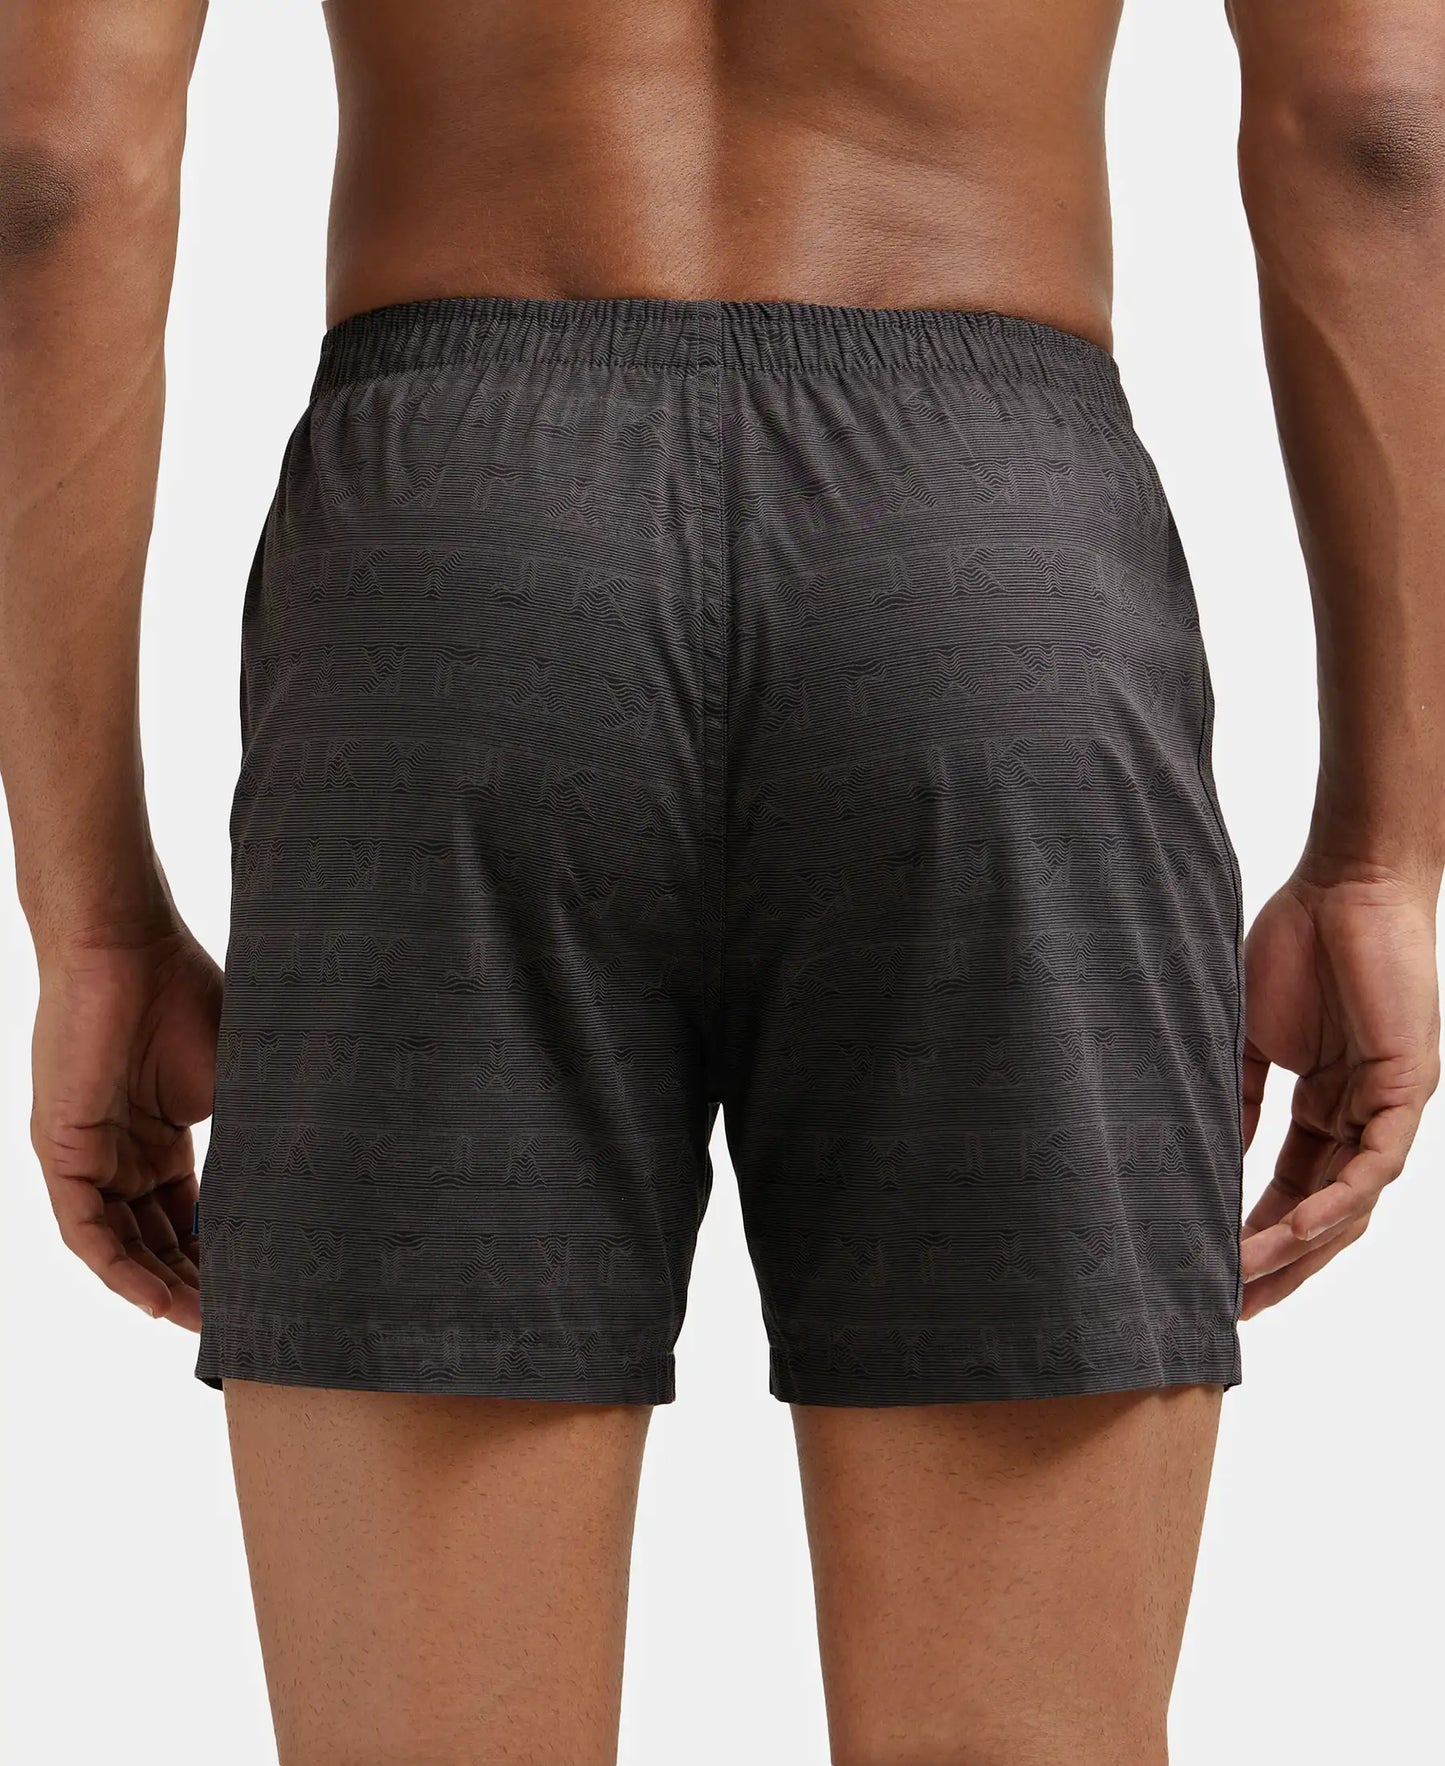 Super Combed Mercerized Cotton Woven Checkered Inner Boxers with Ultrasoft and Durable Inner Waistband - Black & Navy 2-6